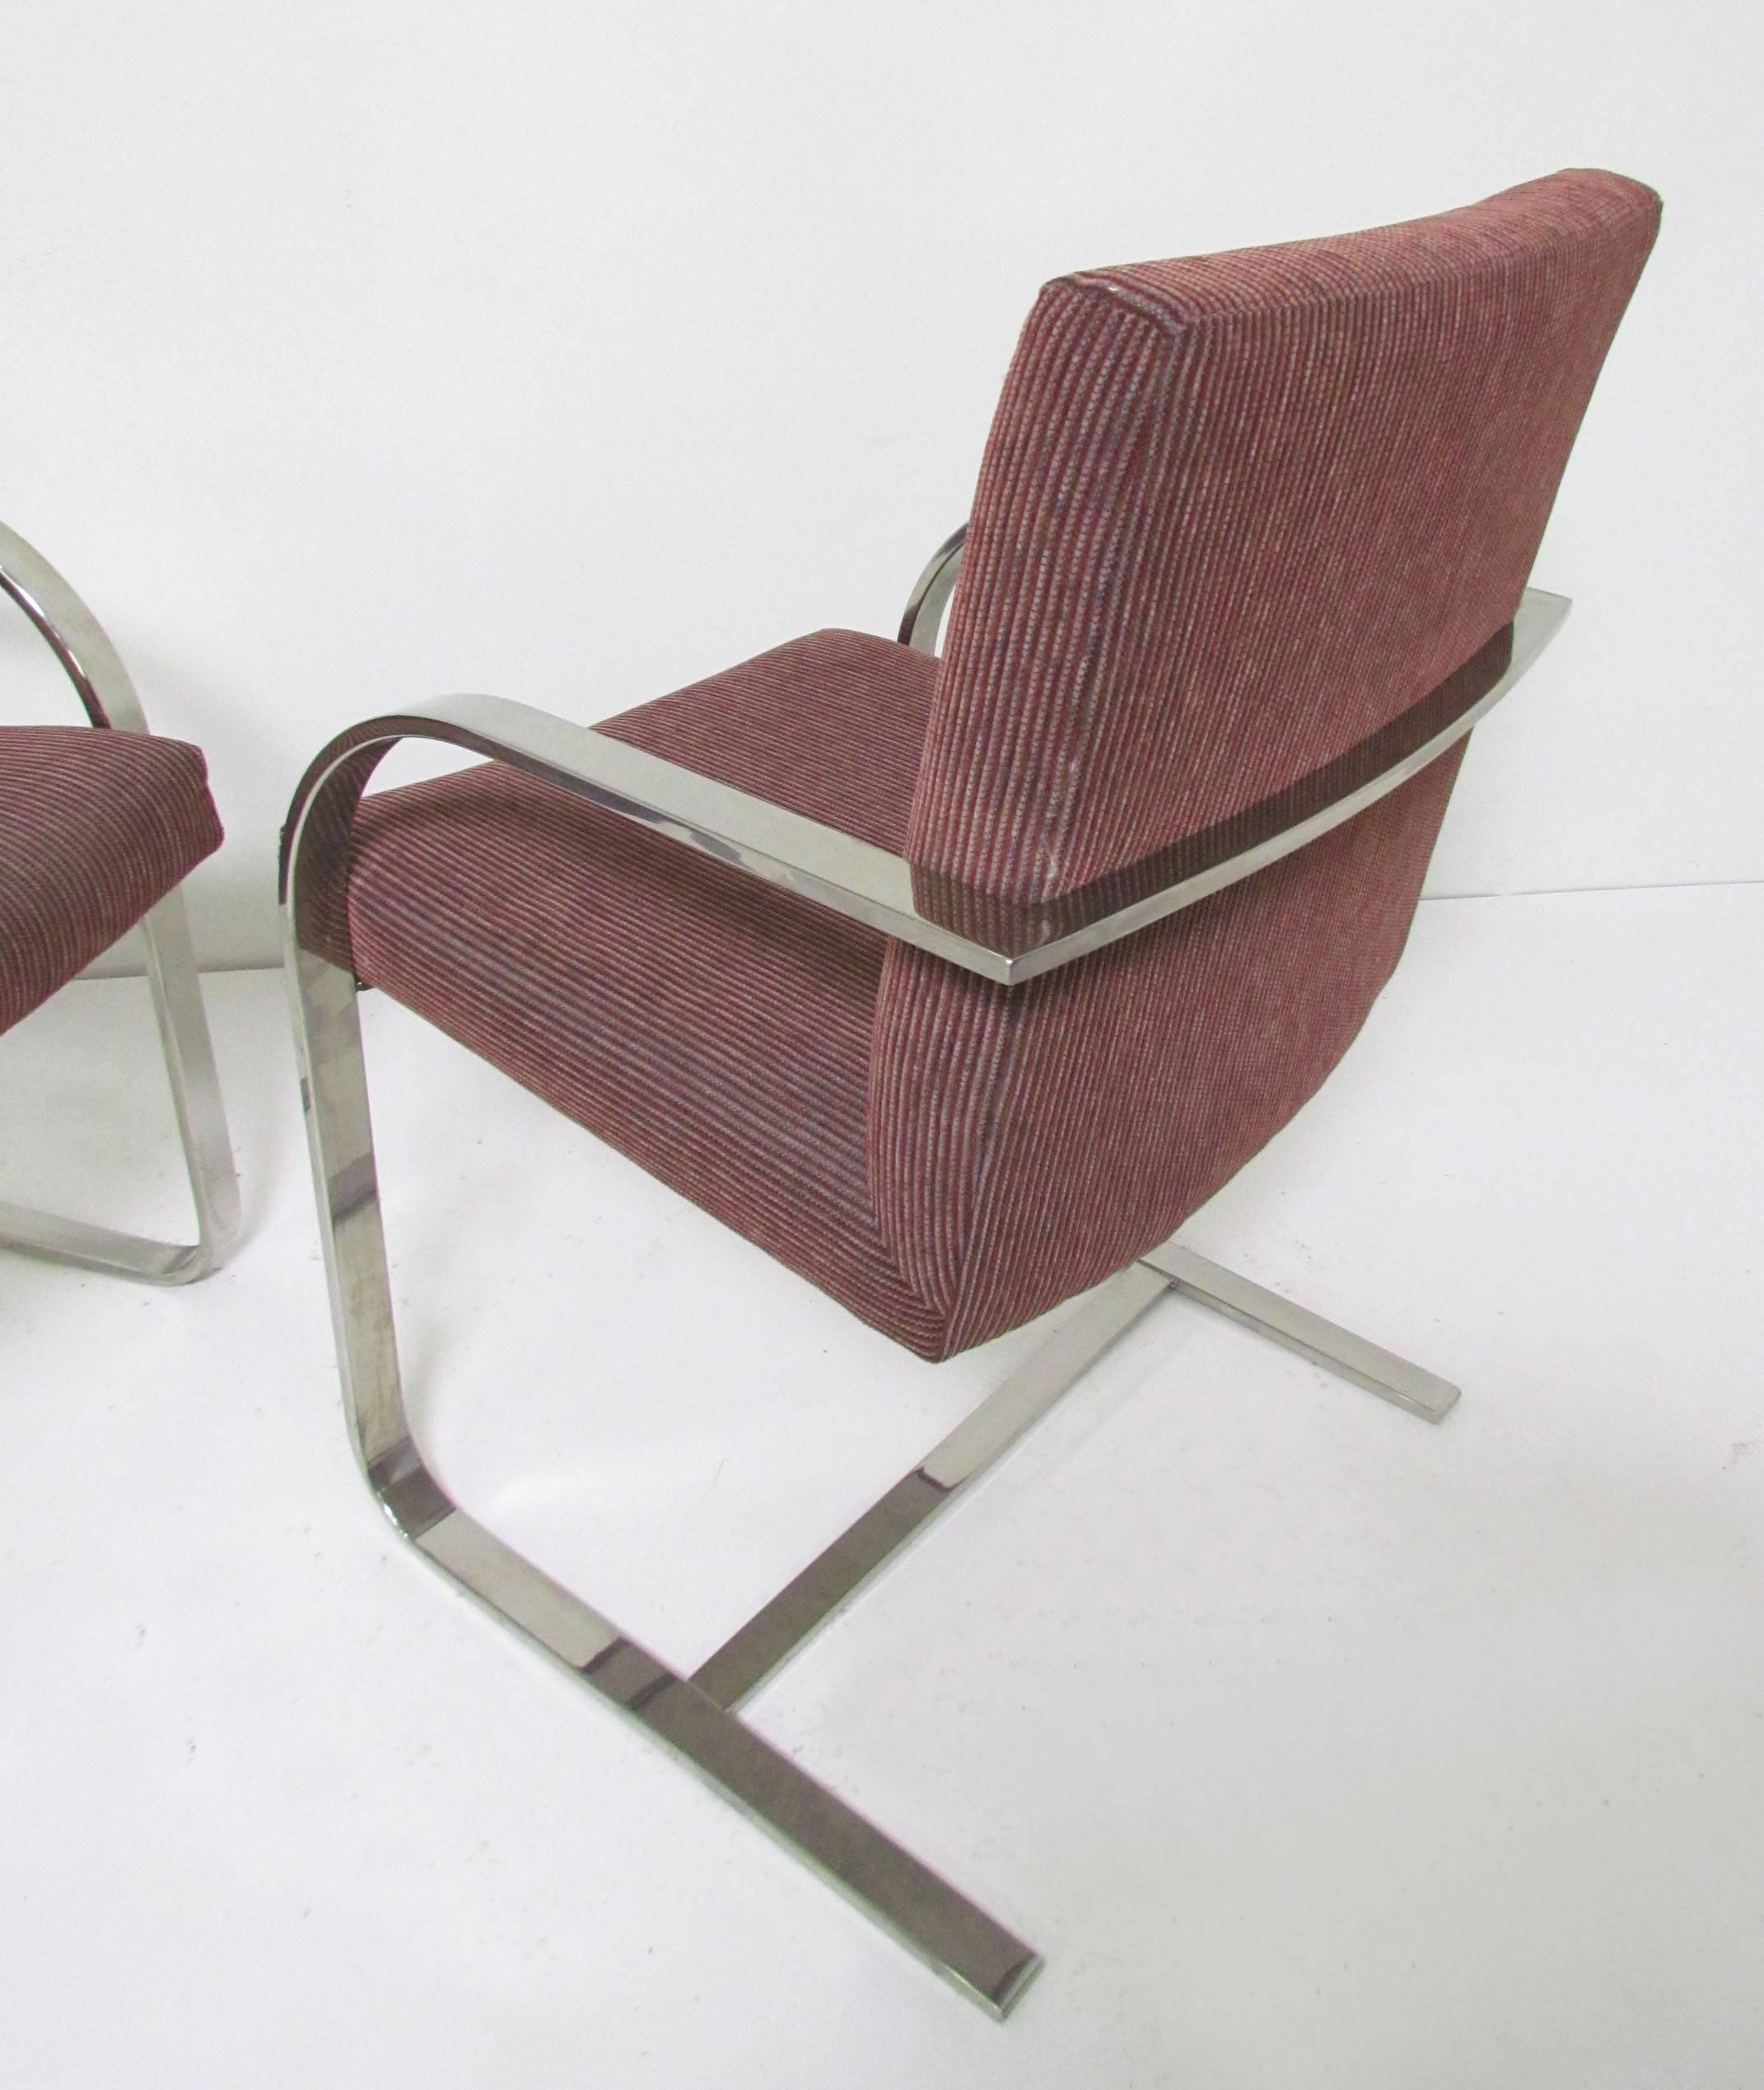 American Set of Four Flat Bar Chrome Brno Chairs, Style of Mies Van Der Rohe